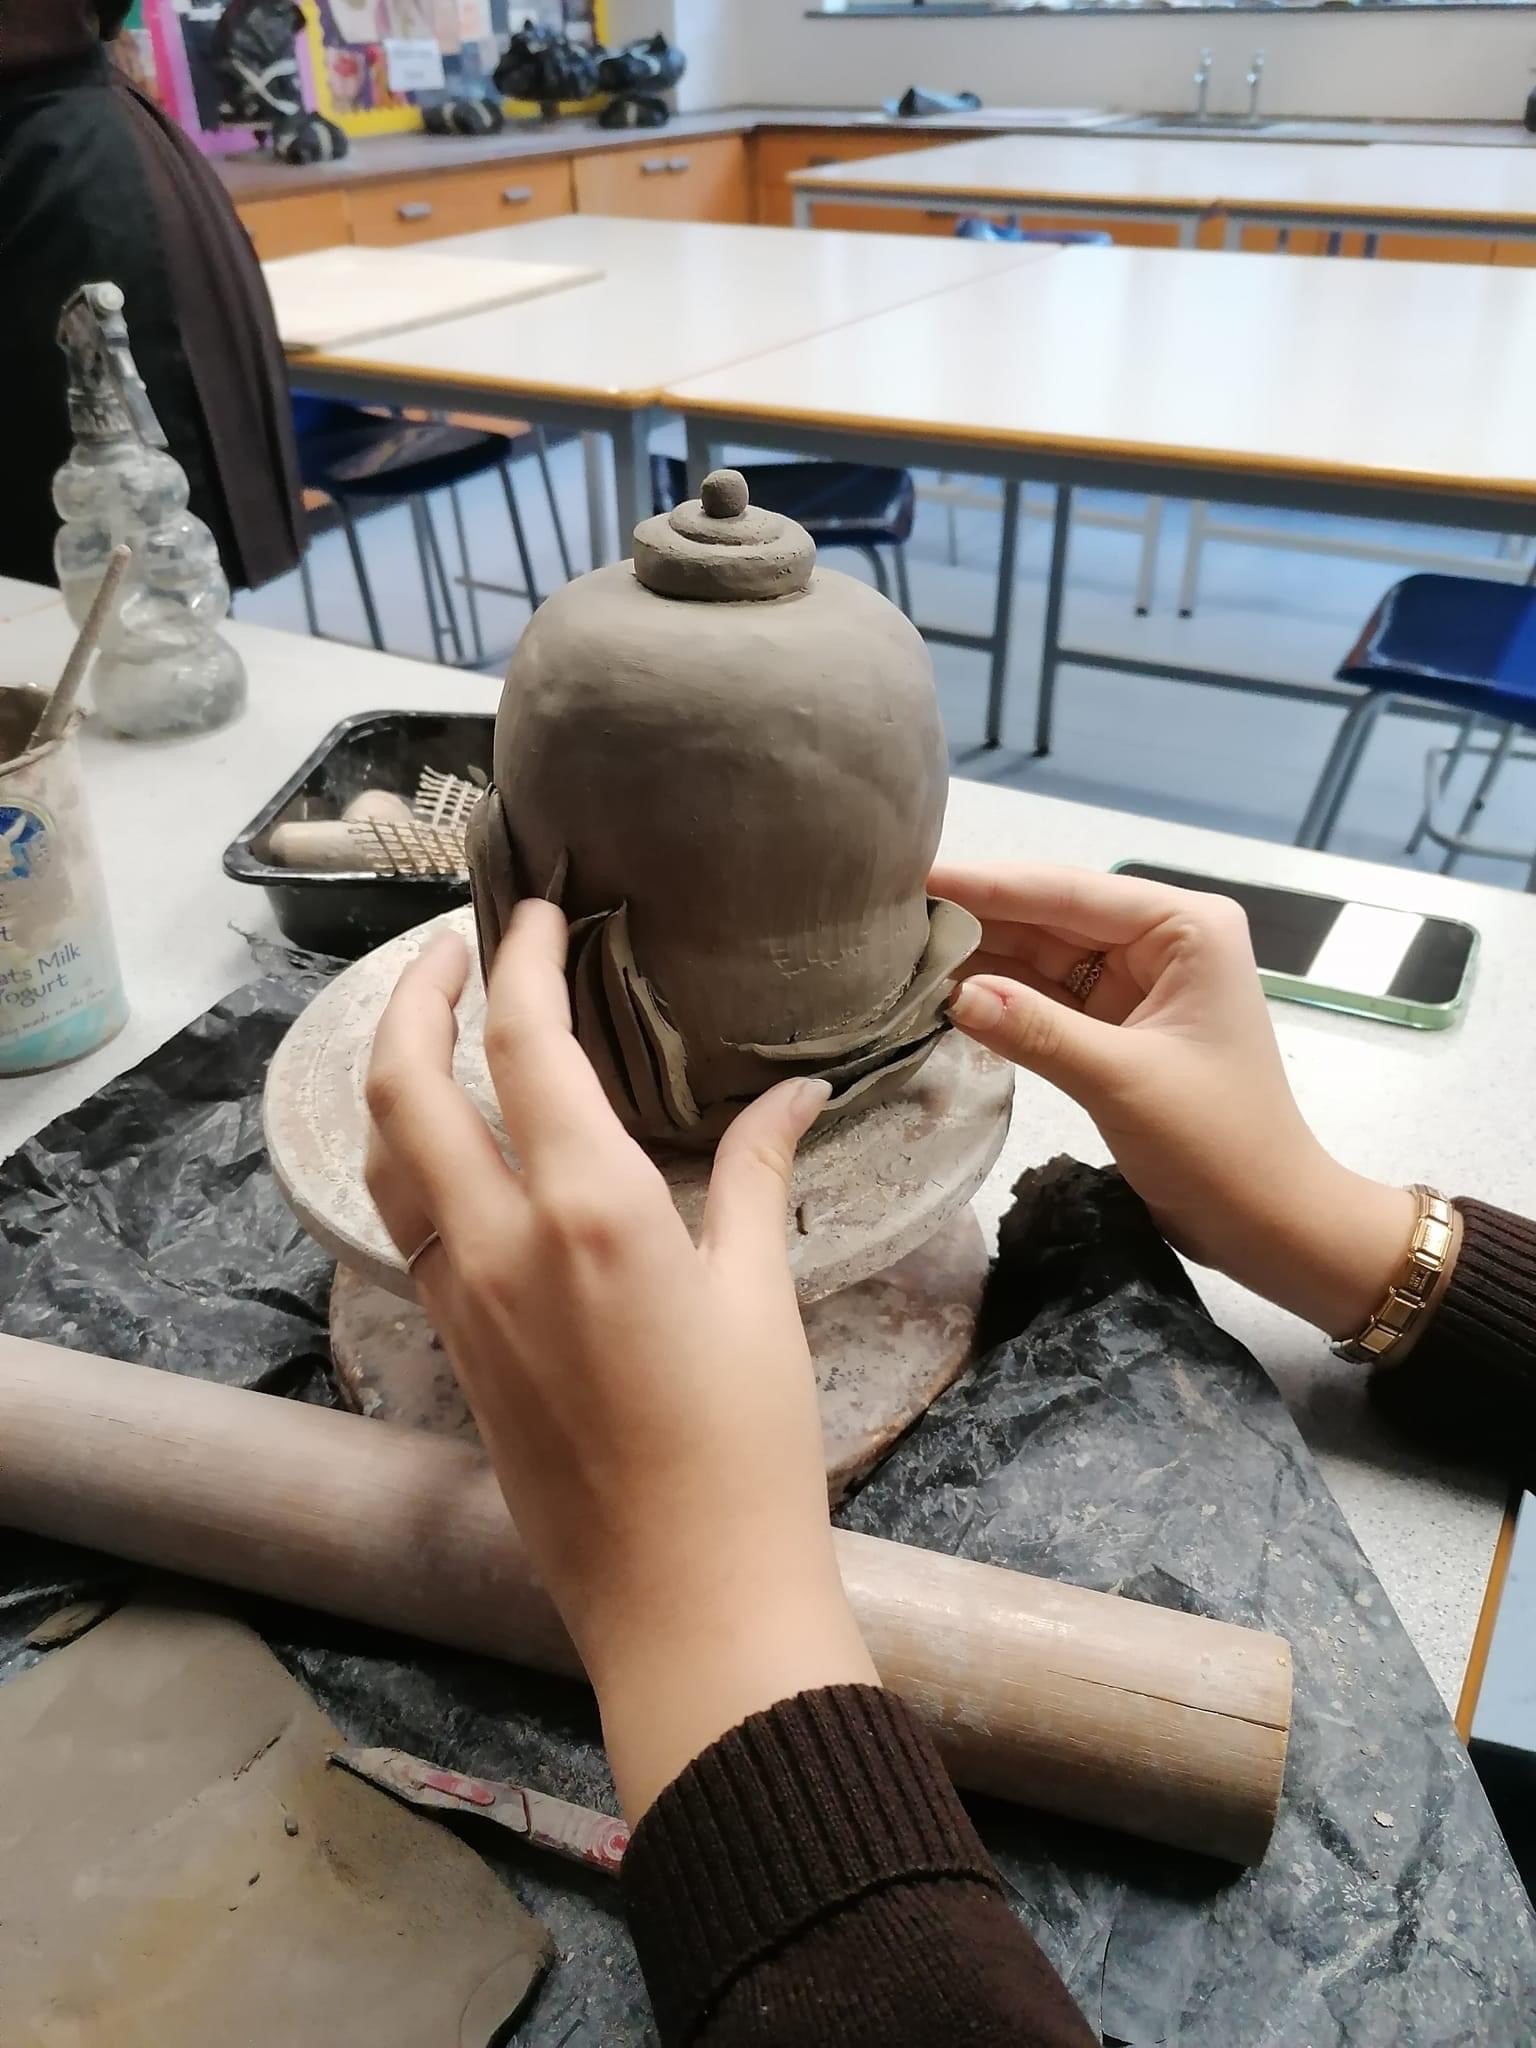 SCULPTING: Year 9 Pupils show their talents at sculpting in Art Class